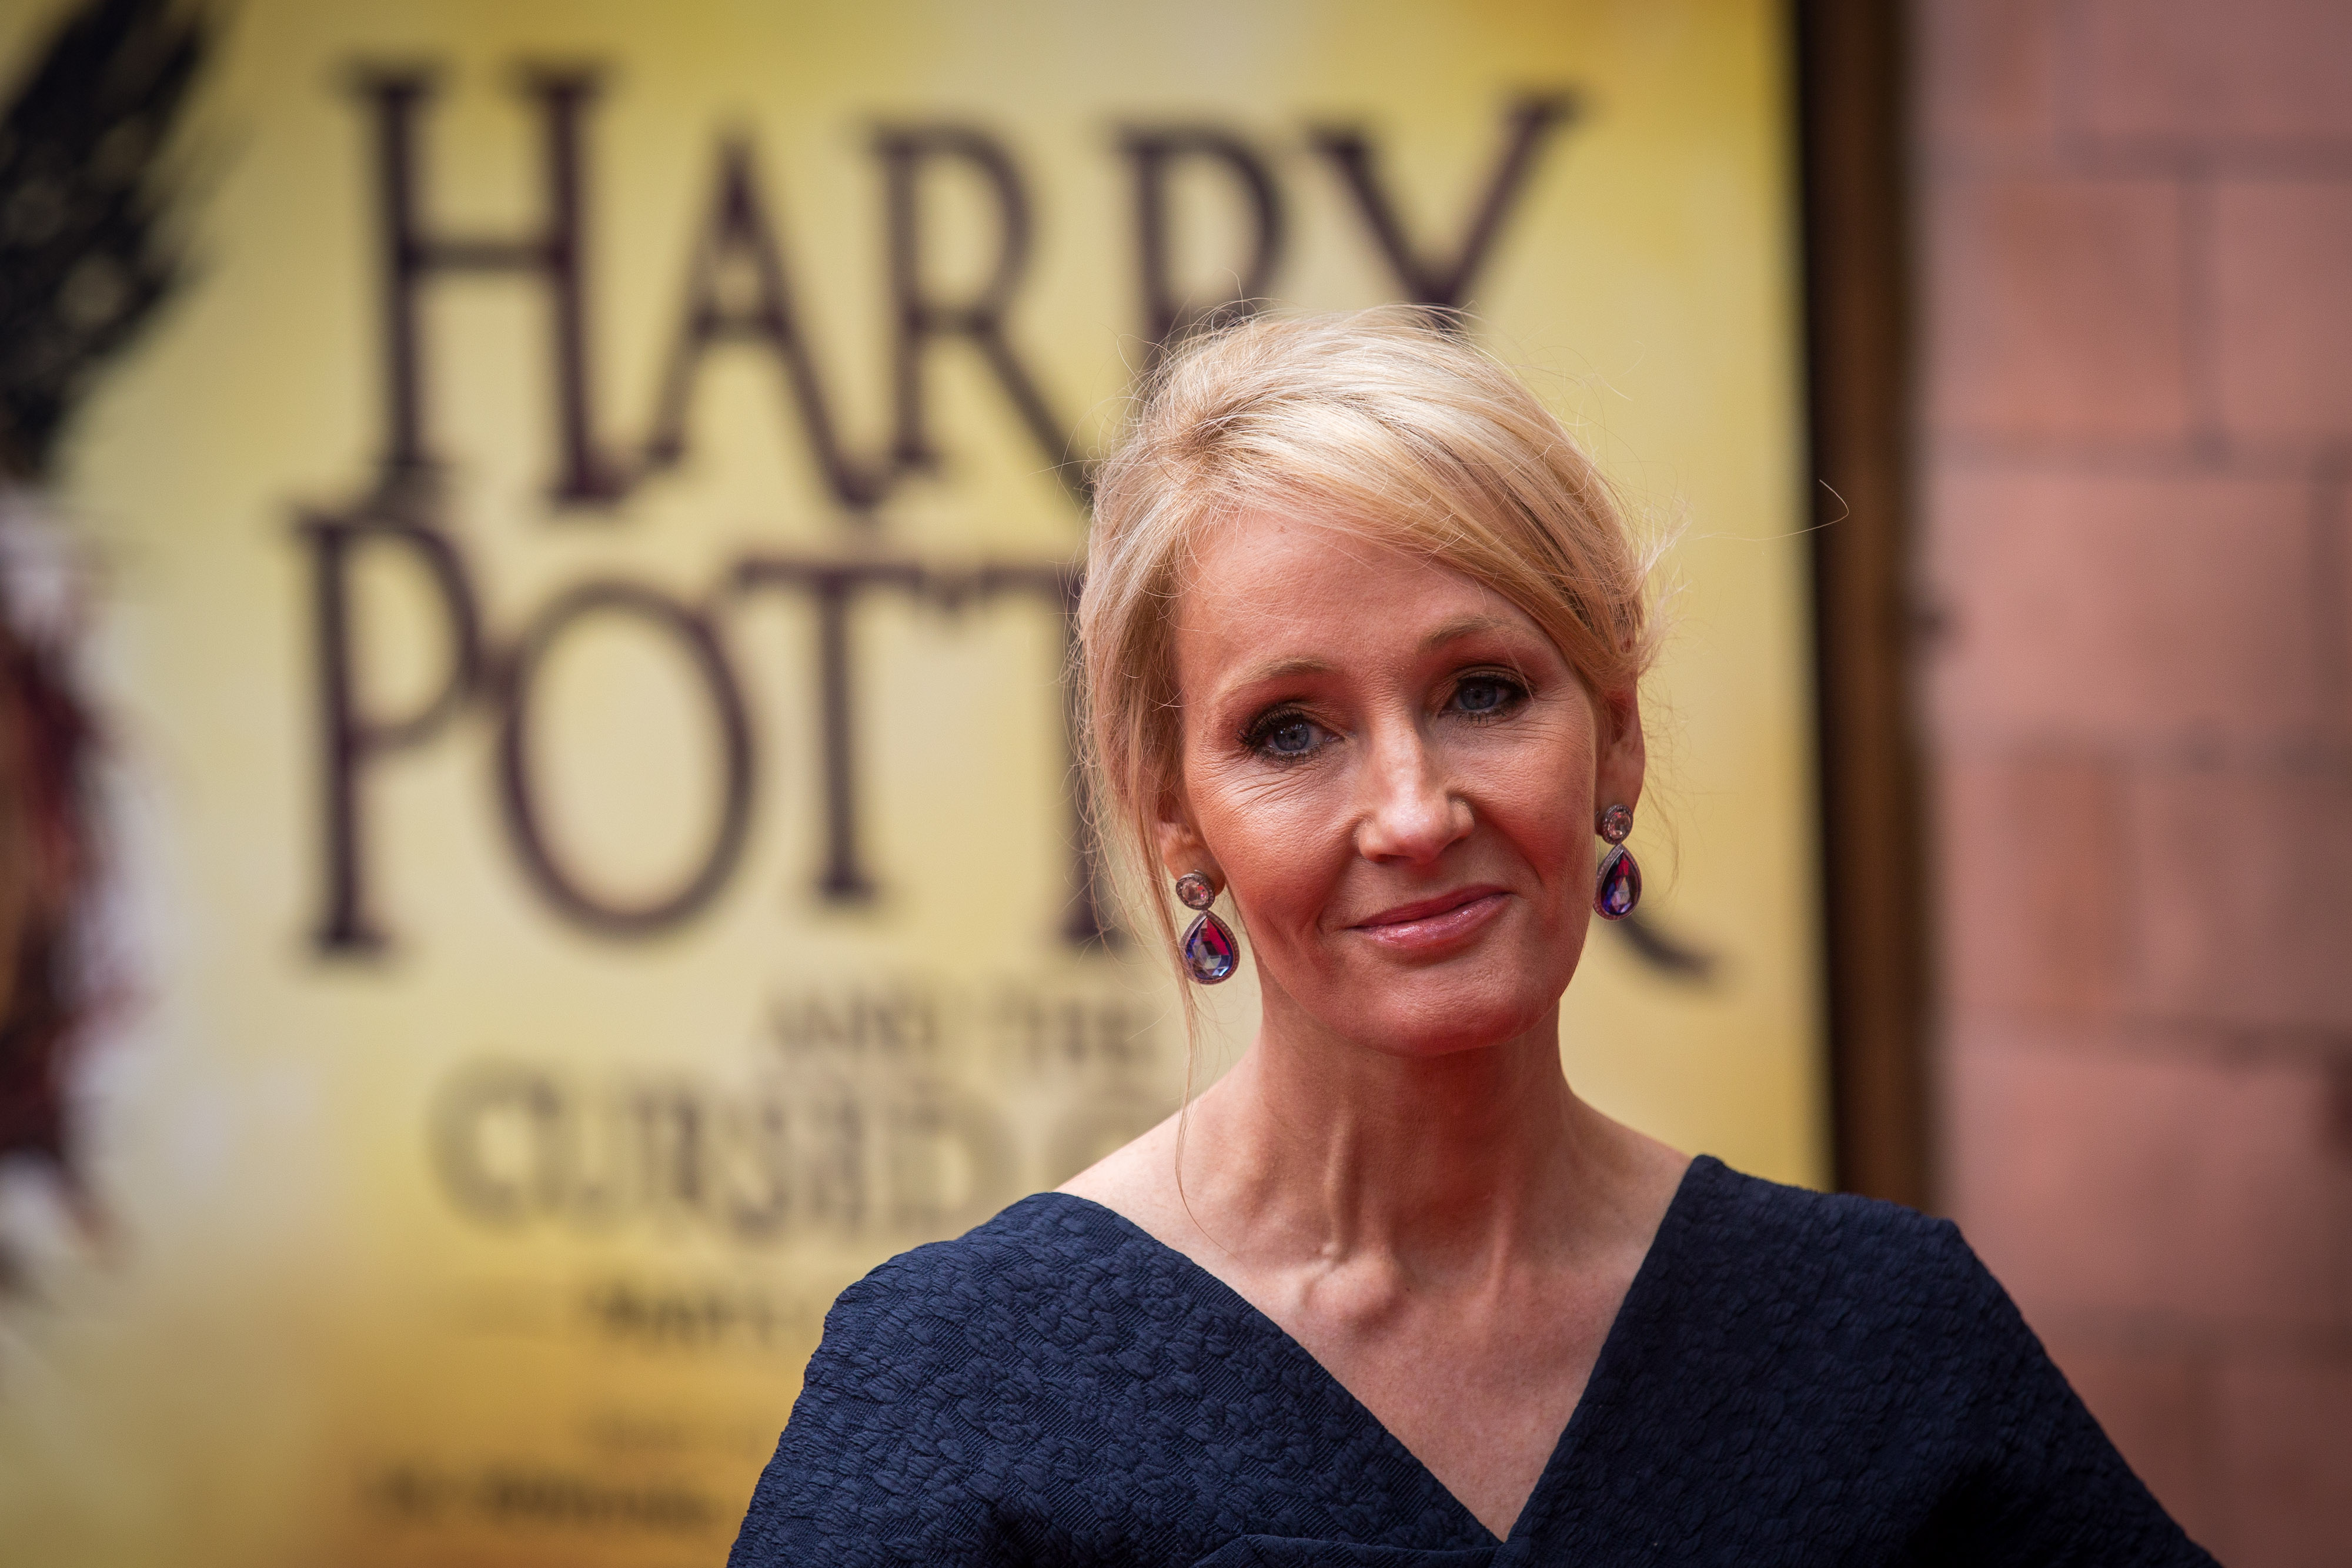 The Boy Who Lived and Just Wouldn’t Die: Has J.K. Rowling Sold Out?